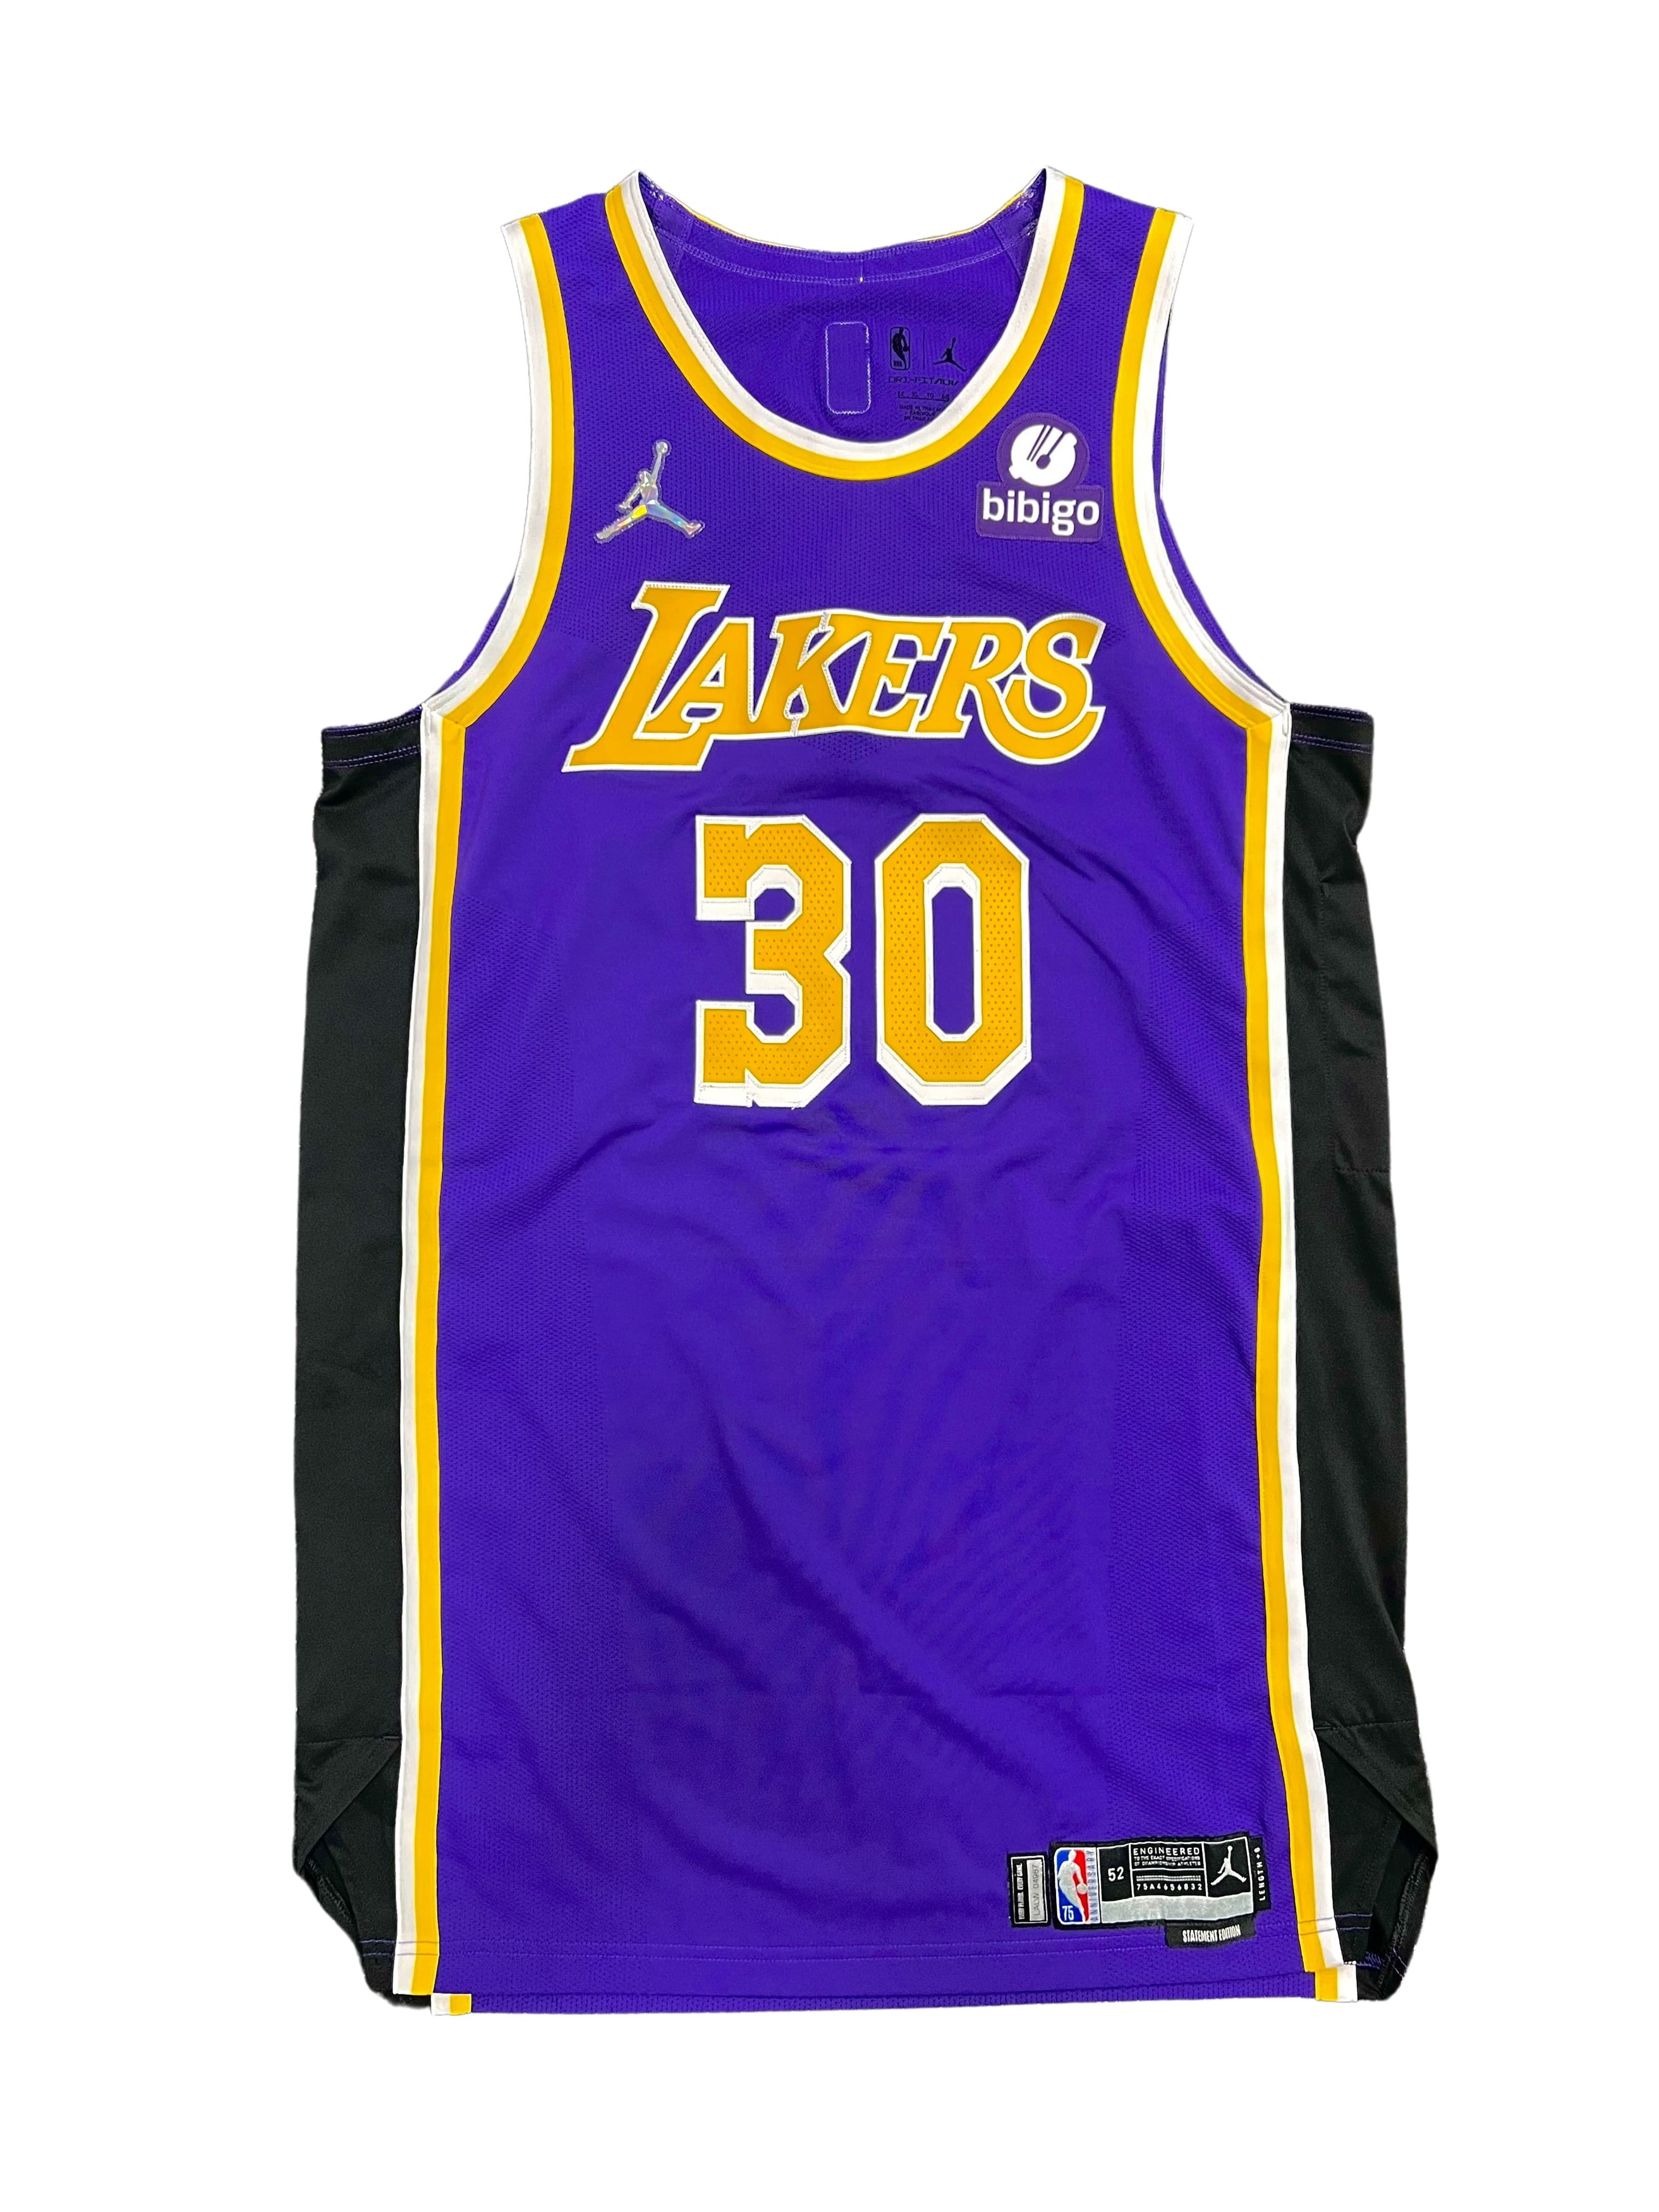 88 lakers jersey